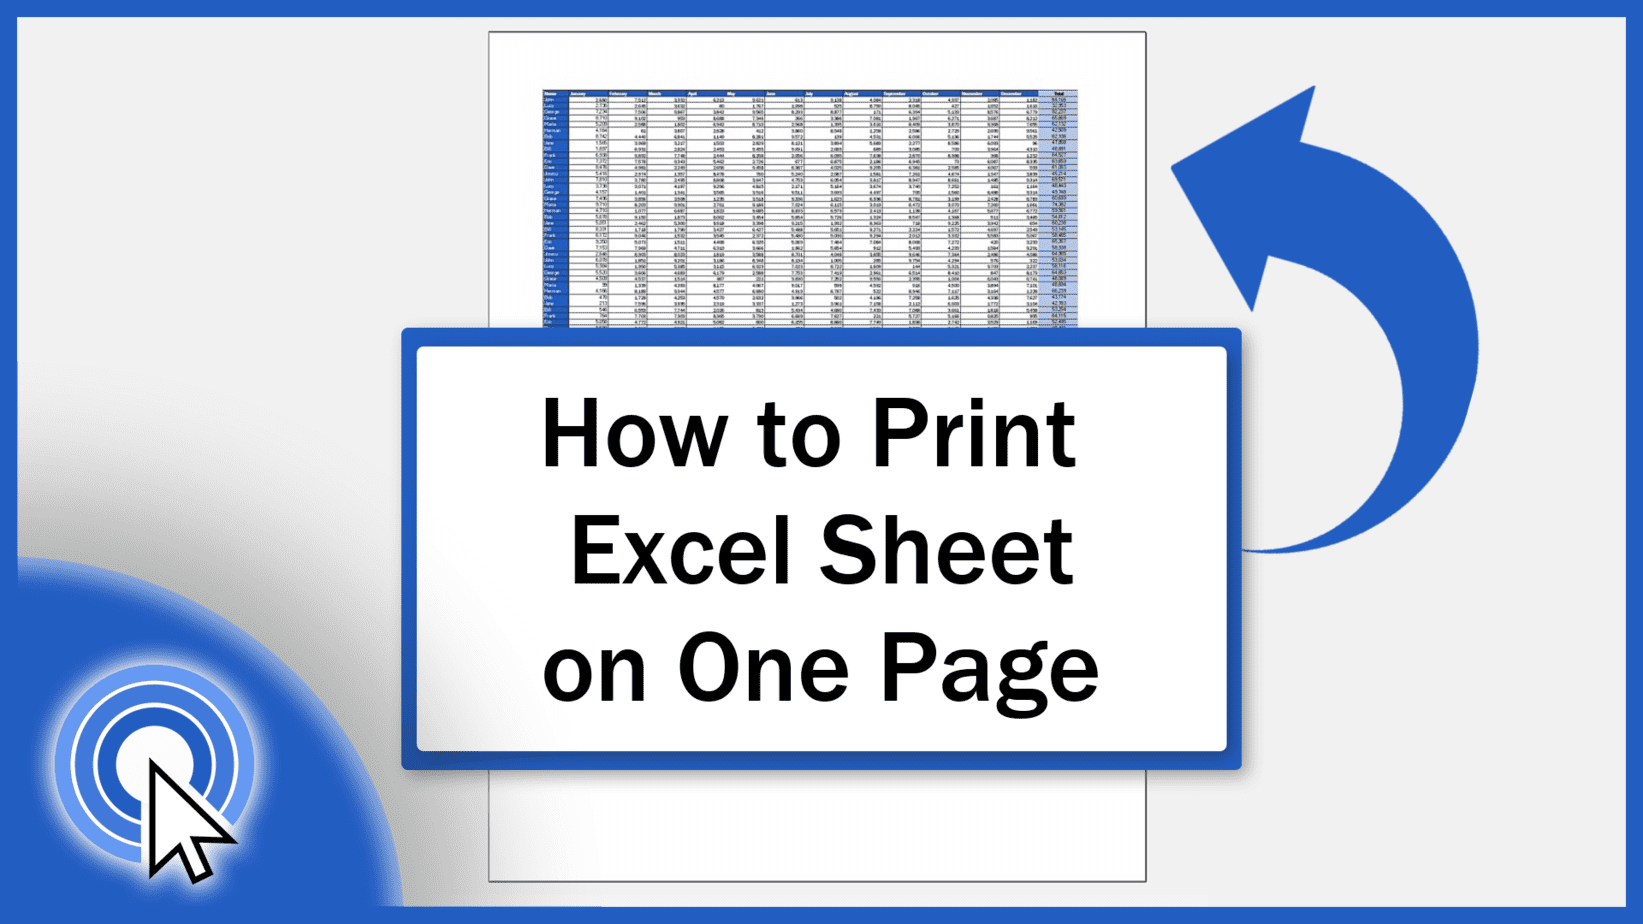 How to Print Excel Sheet on One Page